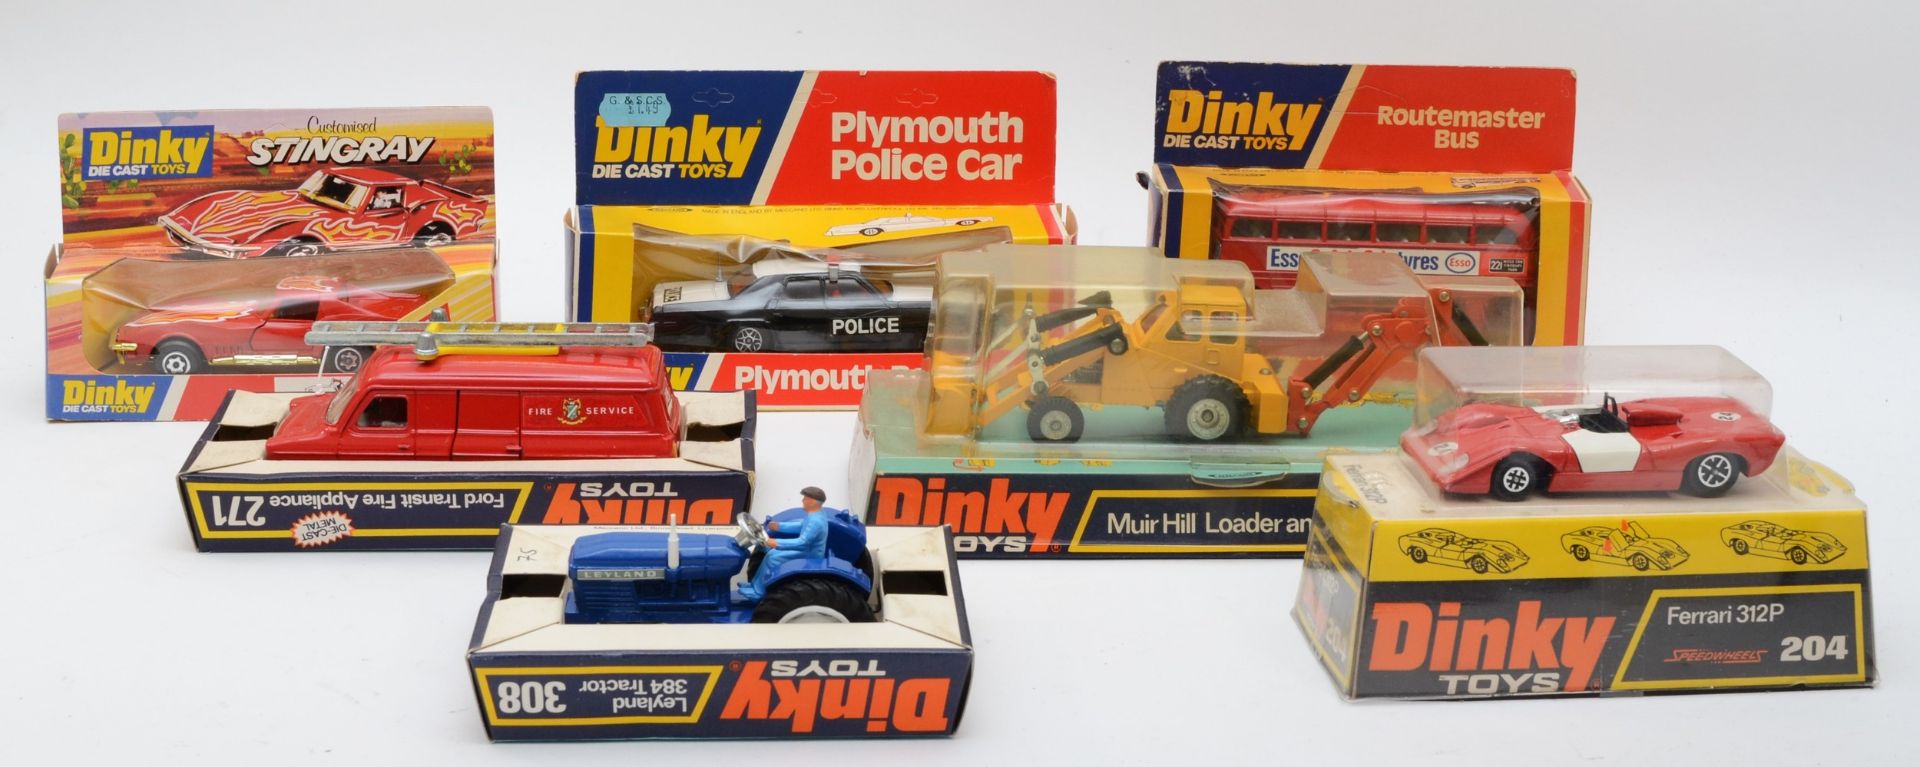 Dinky Toys - A collection of Dinky diecast model toys, circa 1970s, to include Routemaster bus No. - Image 2 of 2